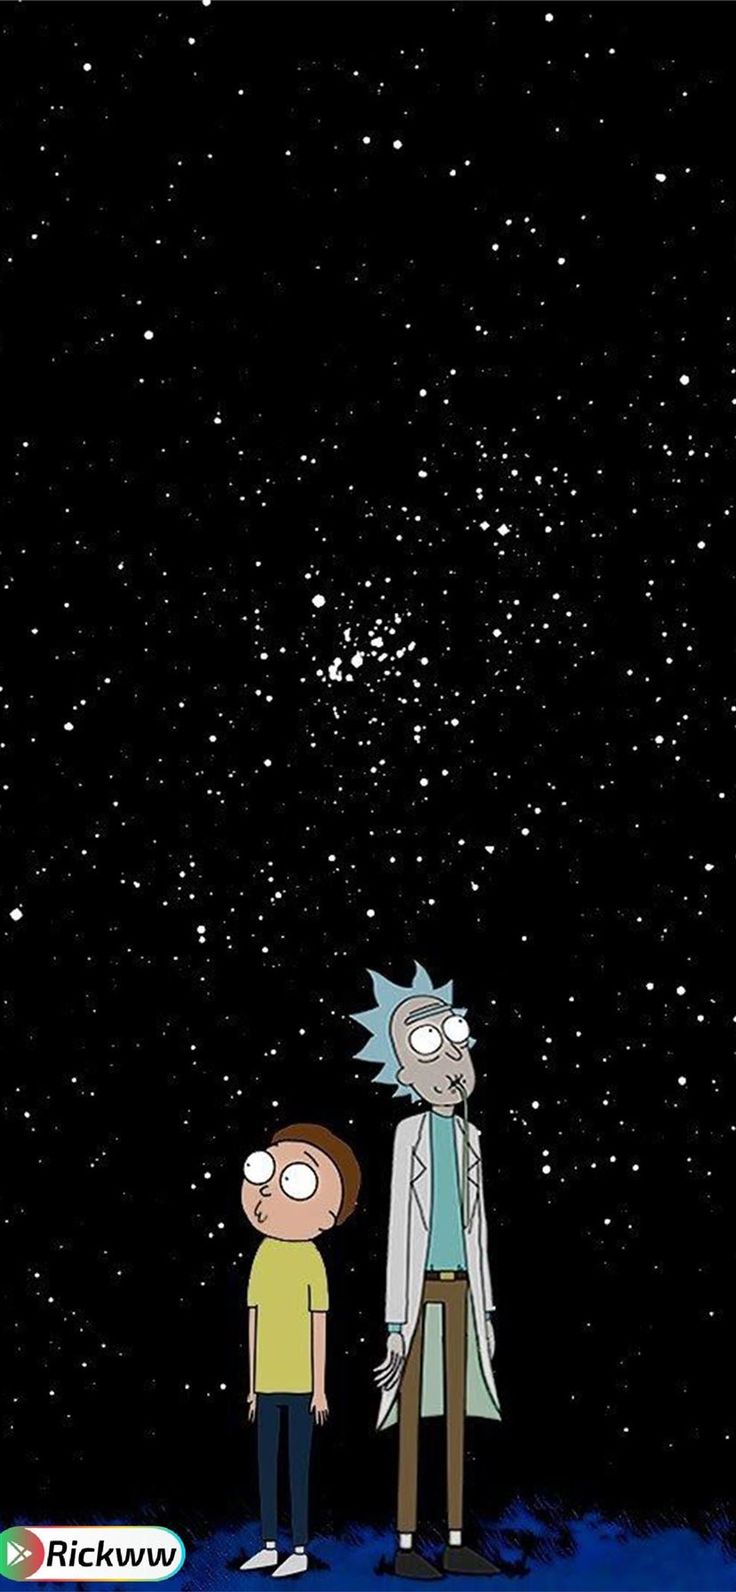 rick and morty iphone rickandmorty trends iPhone11Wallpaper